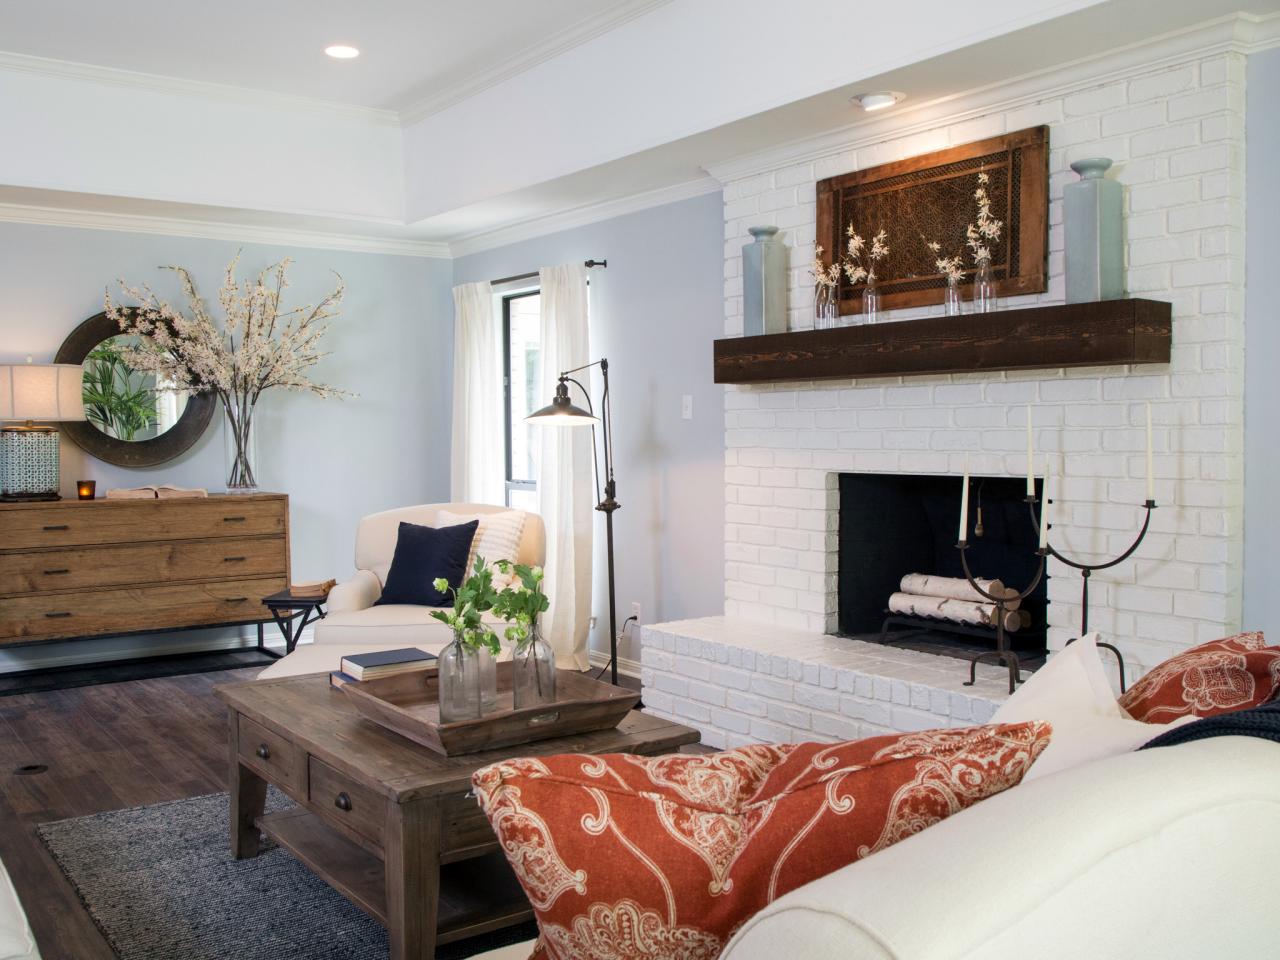 How To Paint A Brick Fireplace White, White Brick Fireplace Wall